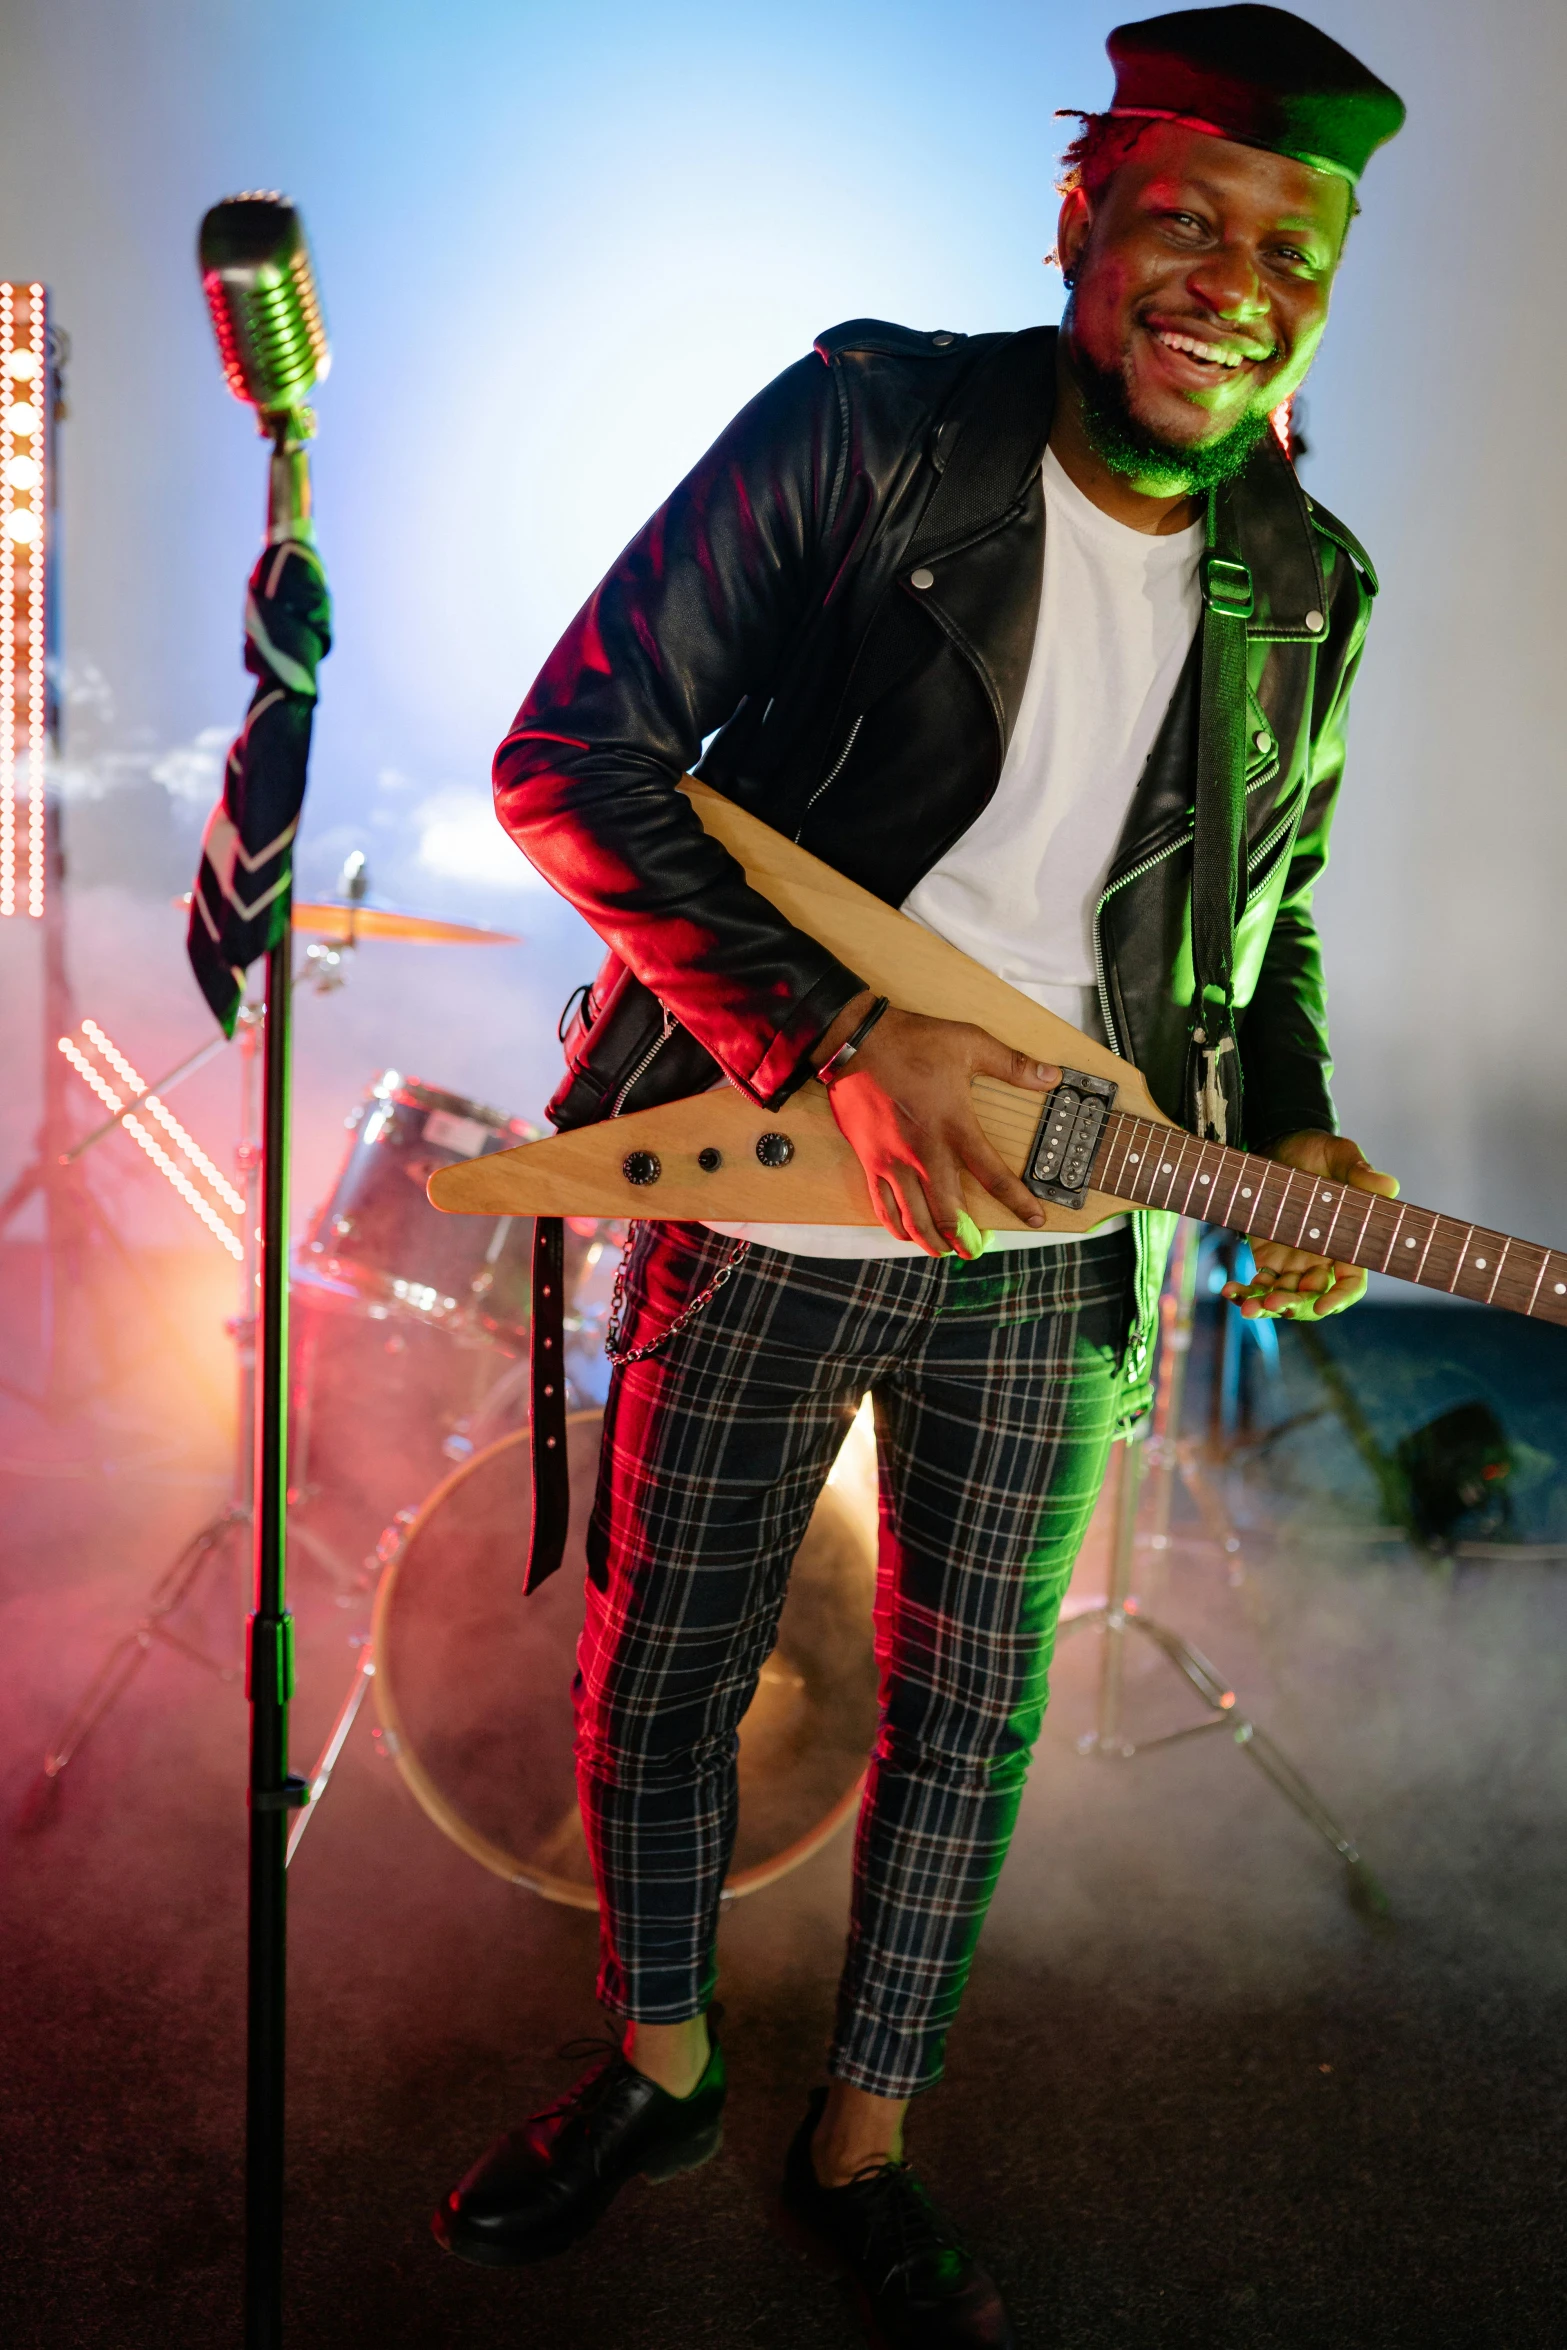 a man standing in front of a microphone holding a guitar, trending on pexels, wearing studded leather, vibrant lights, riyahd cassiem, cinematic outfit photo